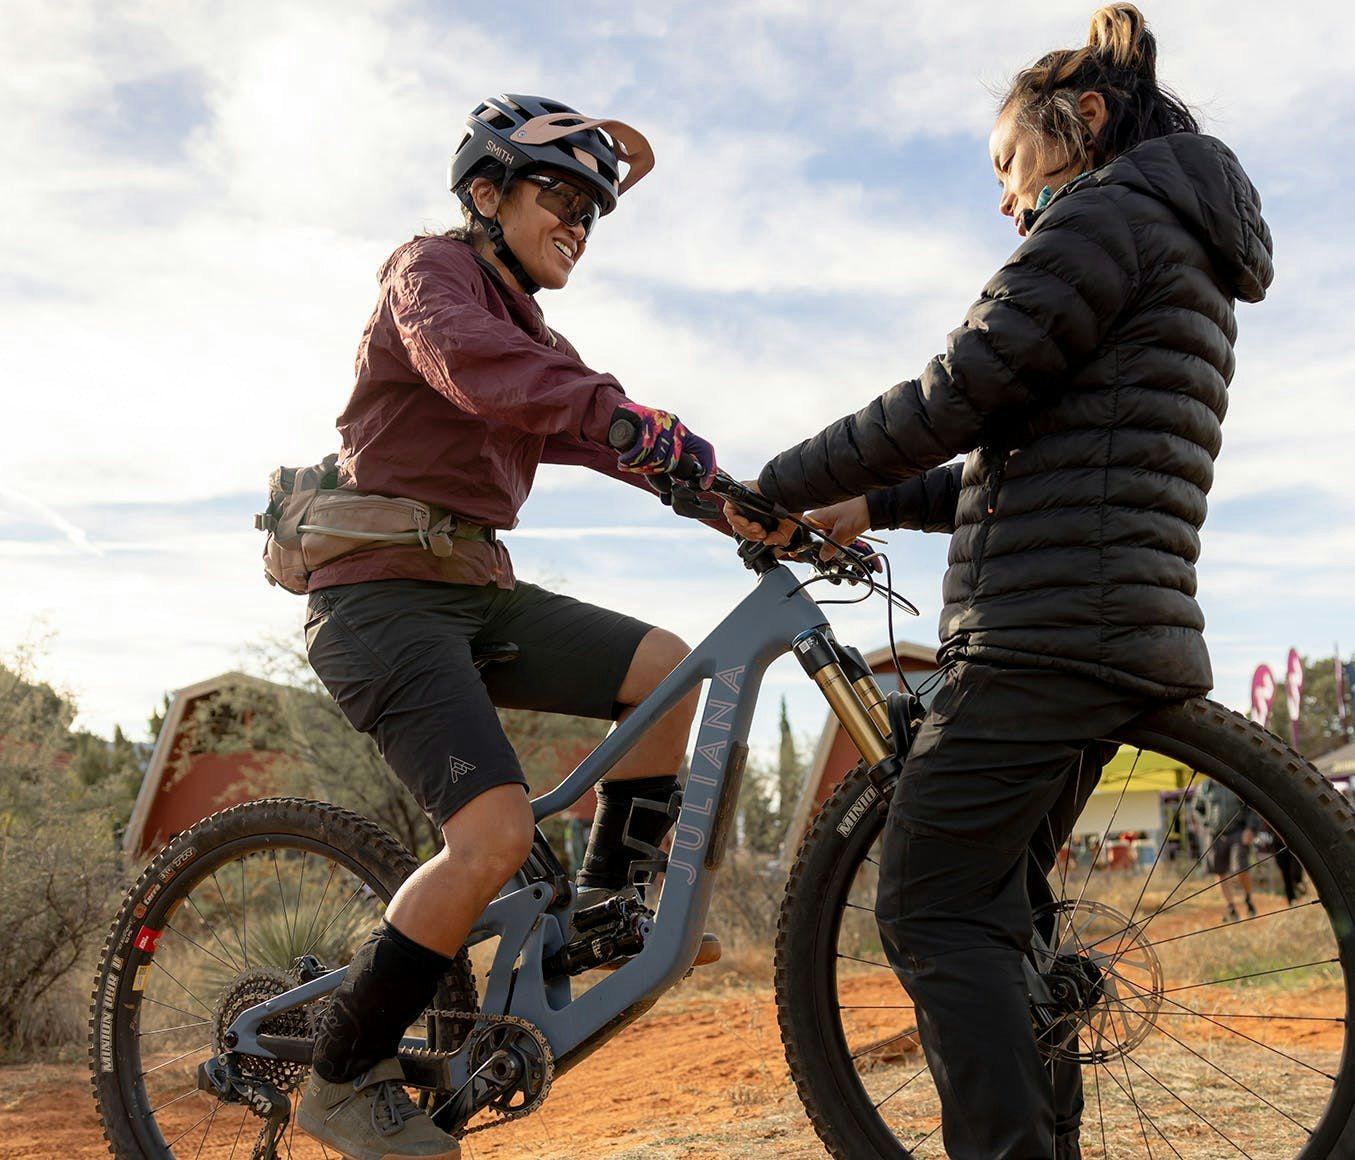 Juliana/SRAM XC Athlete Evelyn Dong setting up the controls on a Juliana Bicycles Roubion for a female mountain biker 